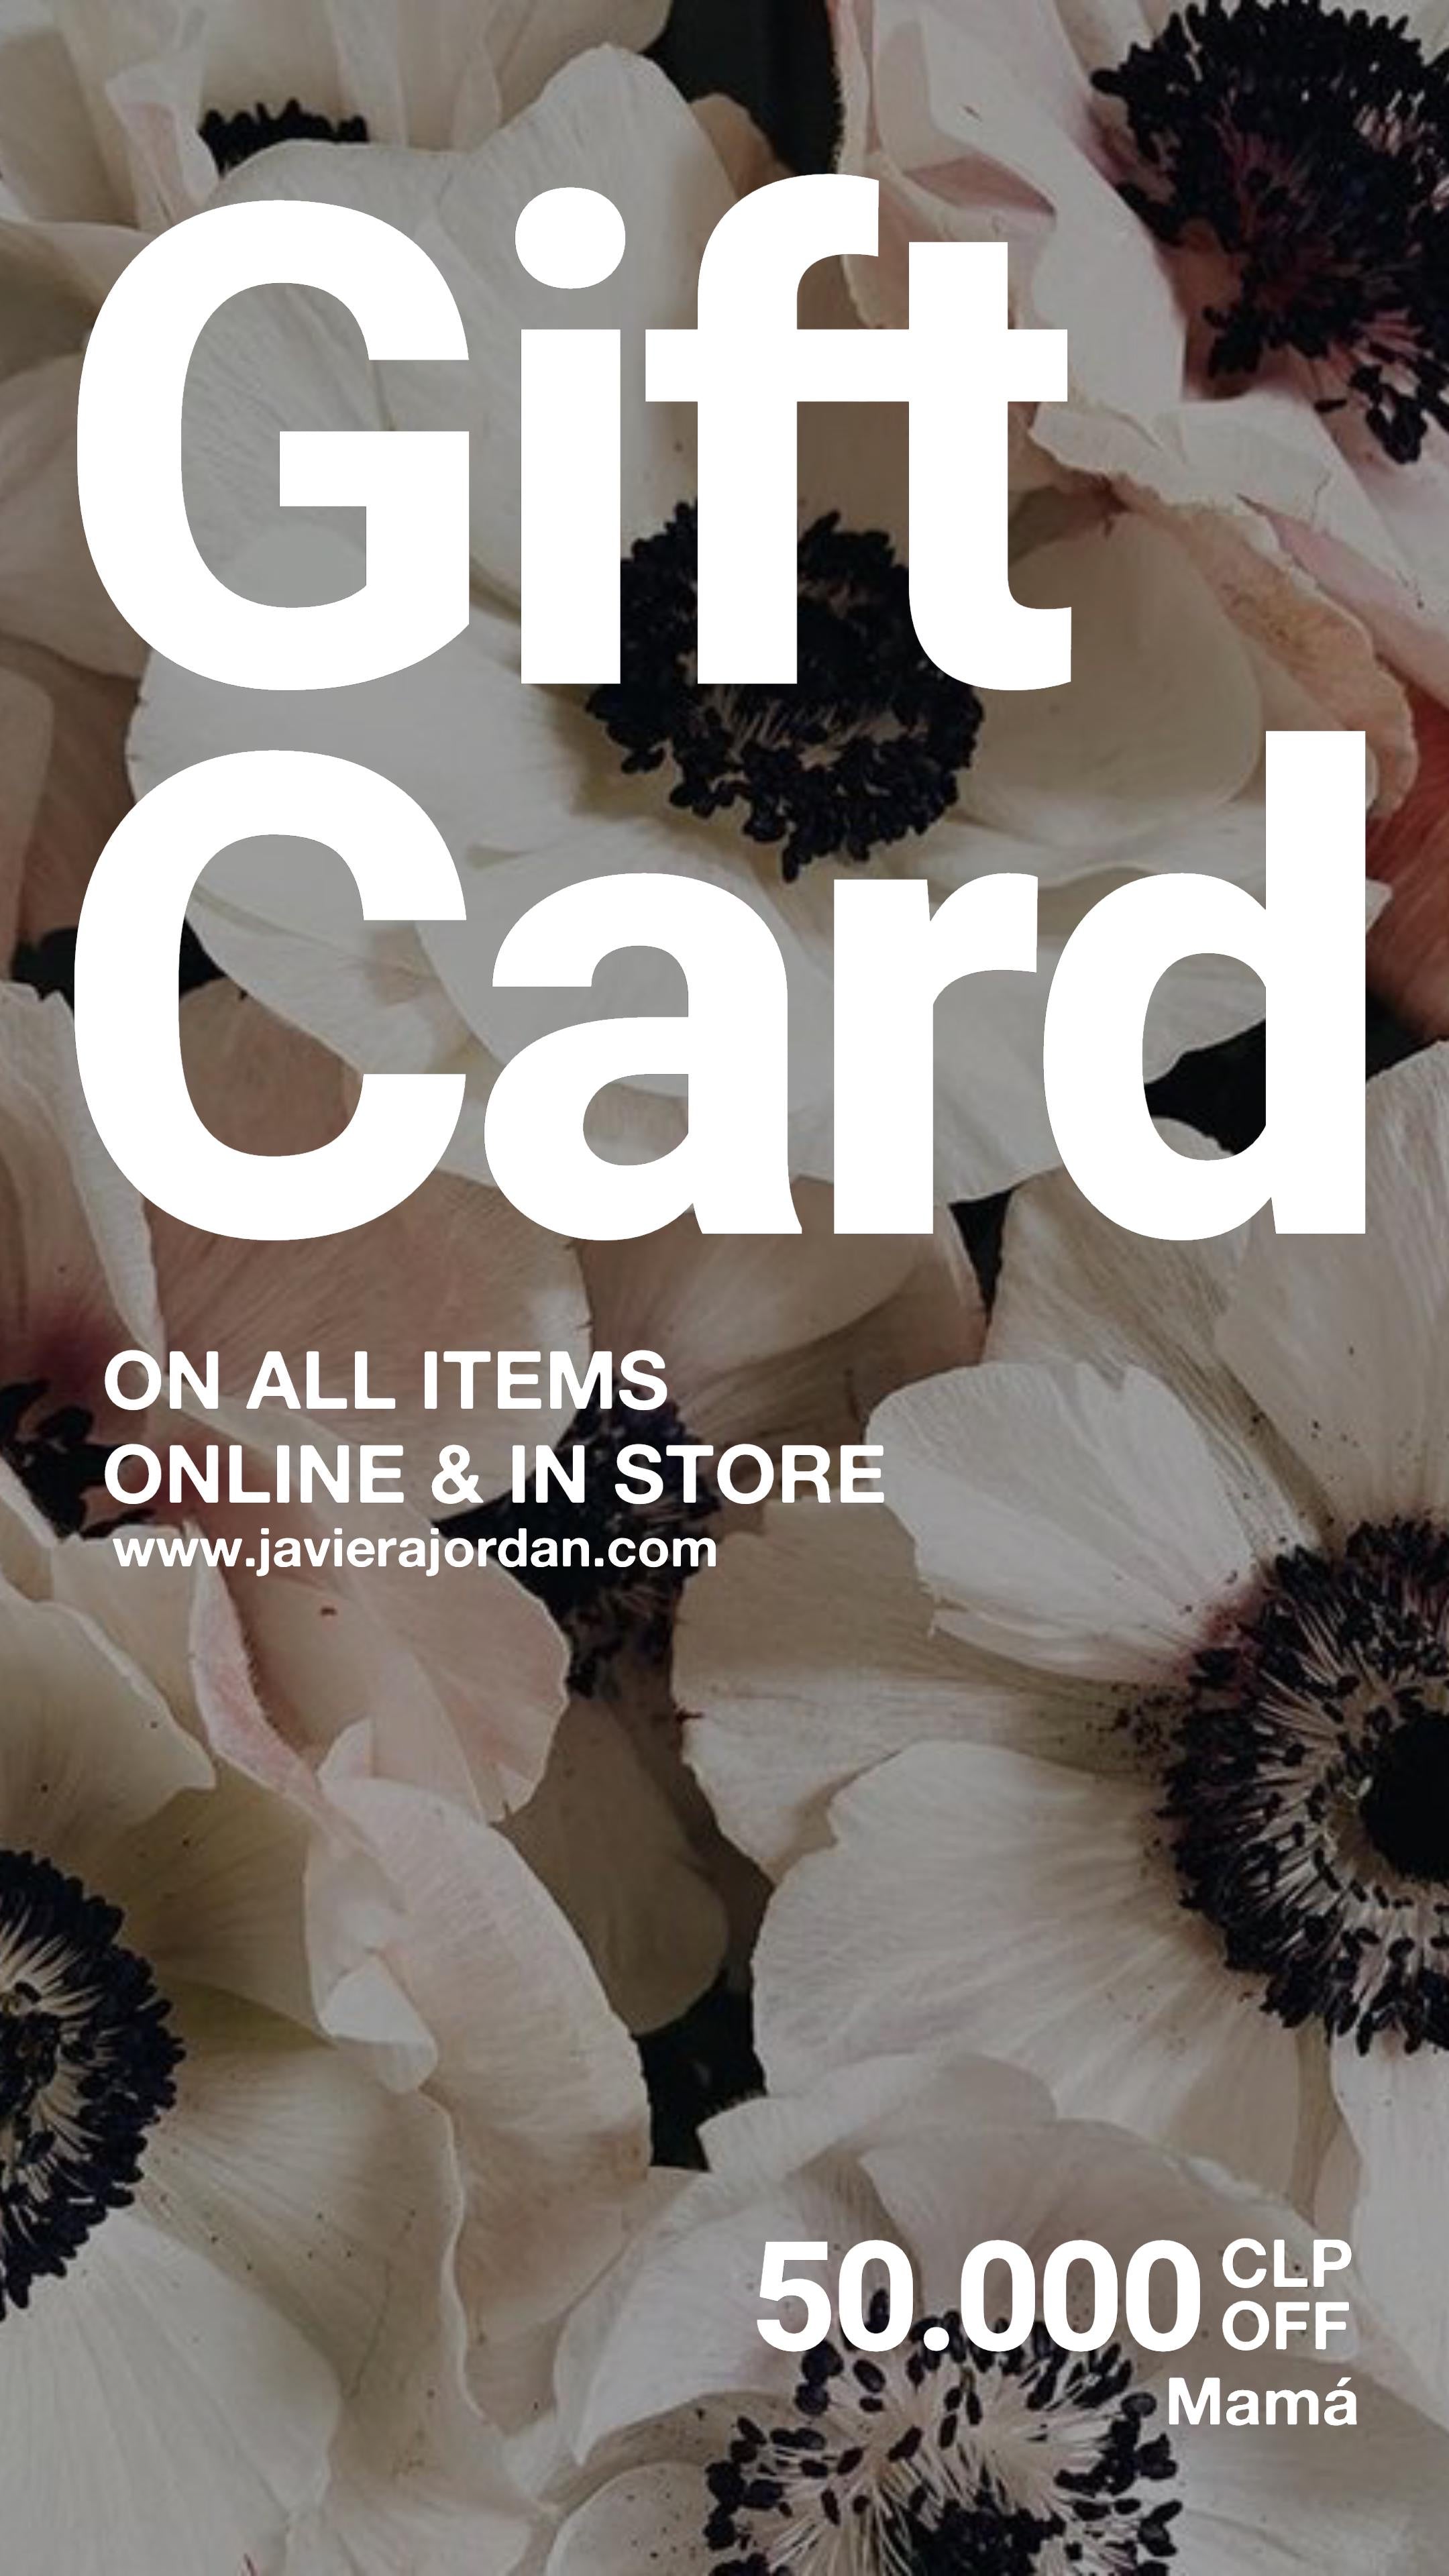 GIFT CARD COLLECTIONS